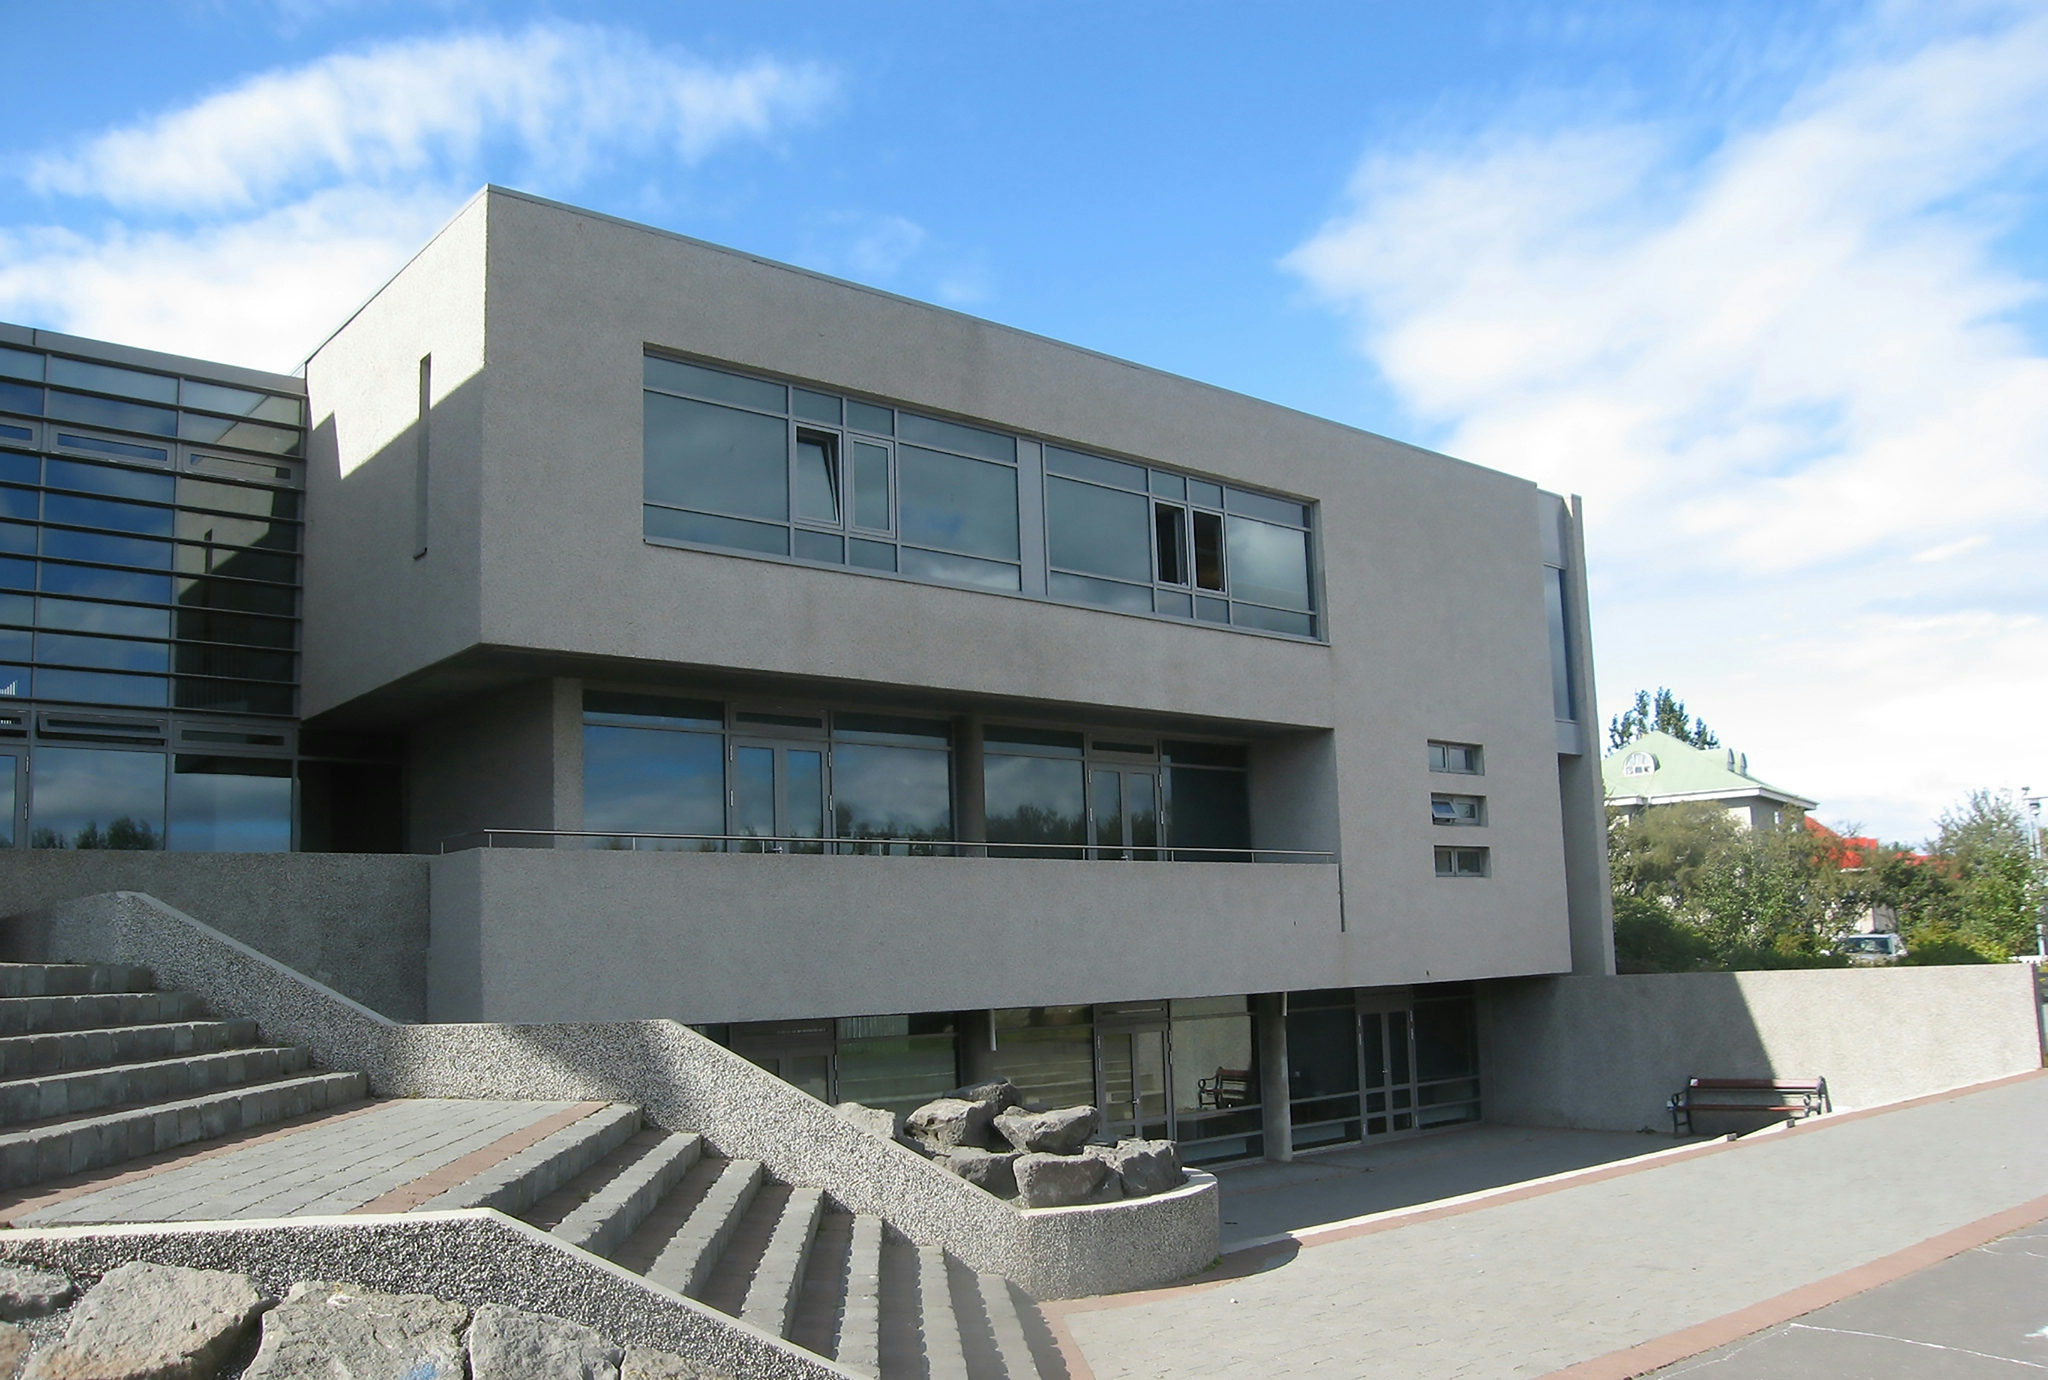 Extension to Laugarnes-school in Reykjavik - 1. prize in competition 2003. 